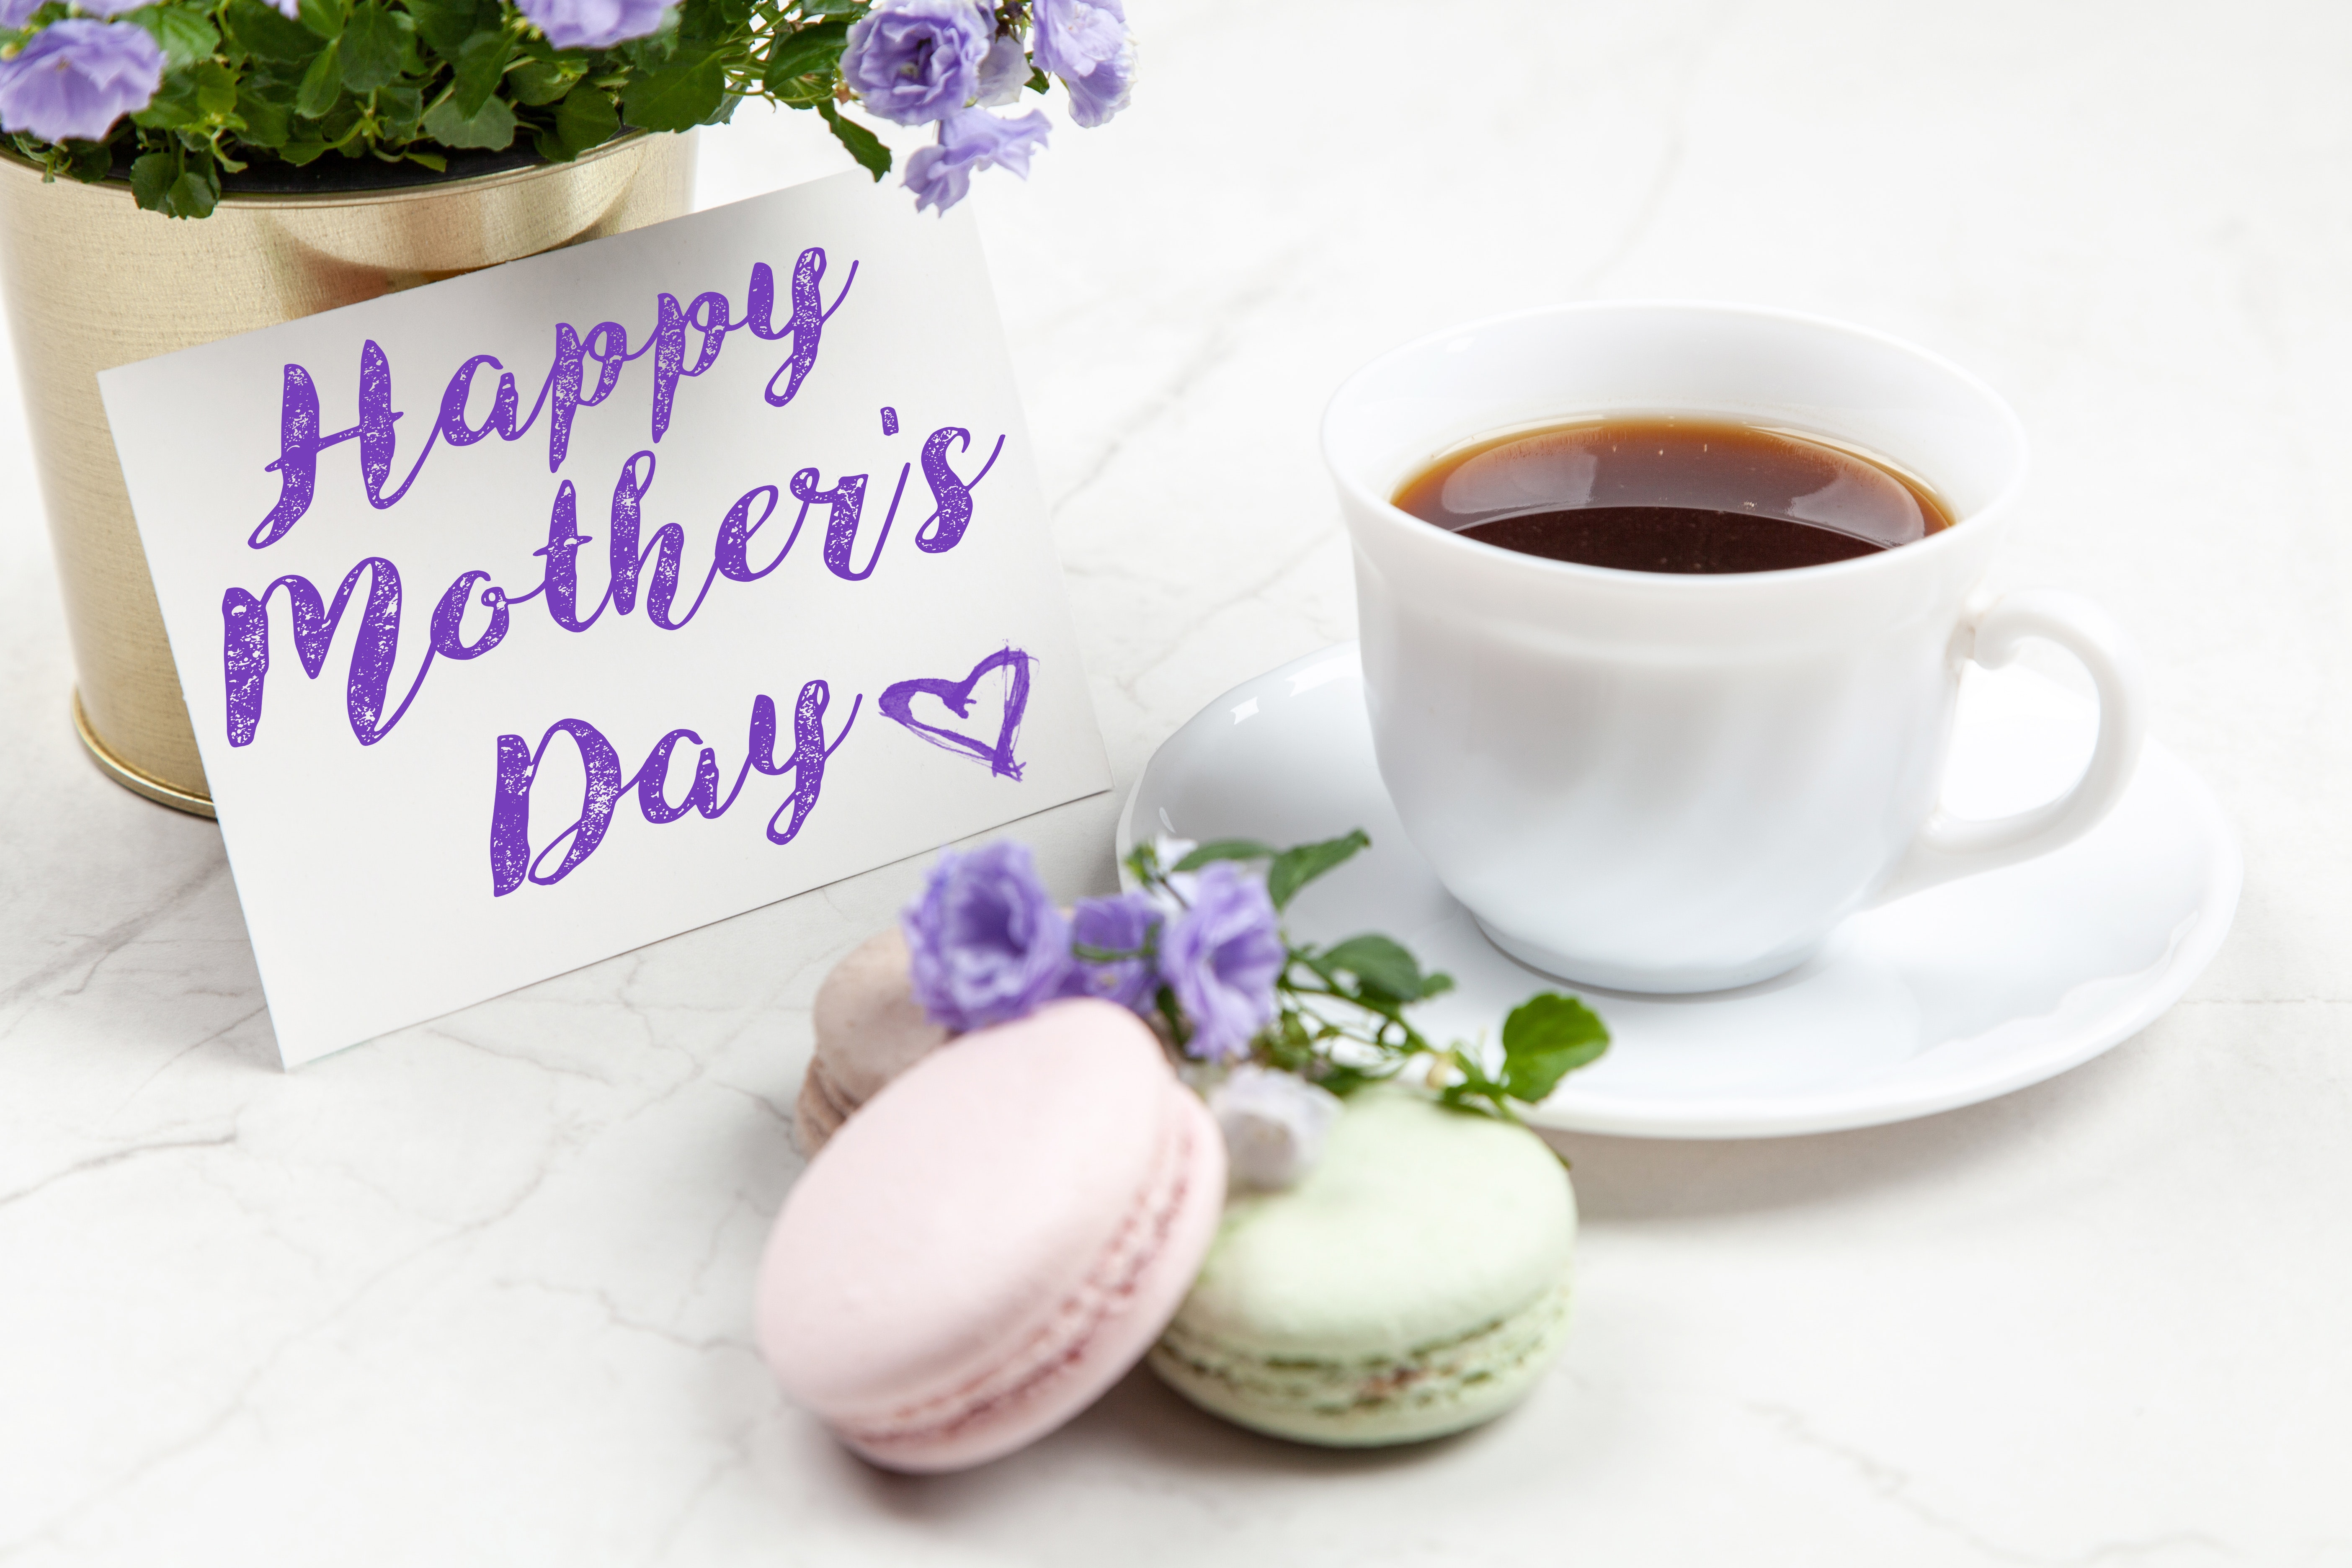 Happy Mother's Day greeting card with tea and macaroons